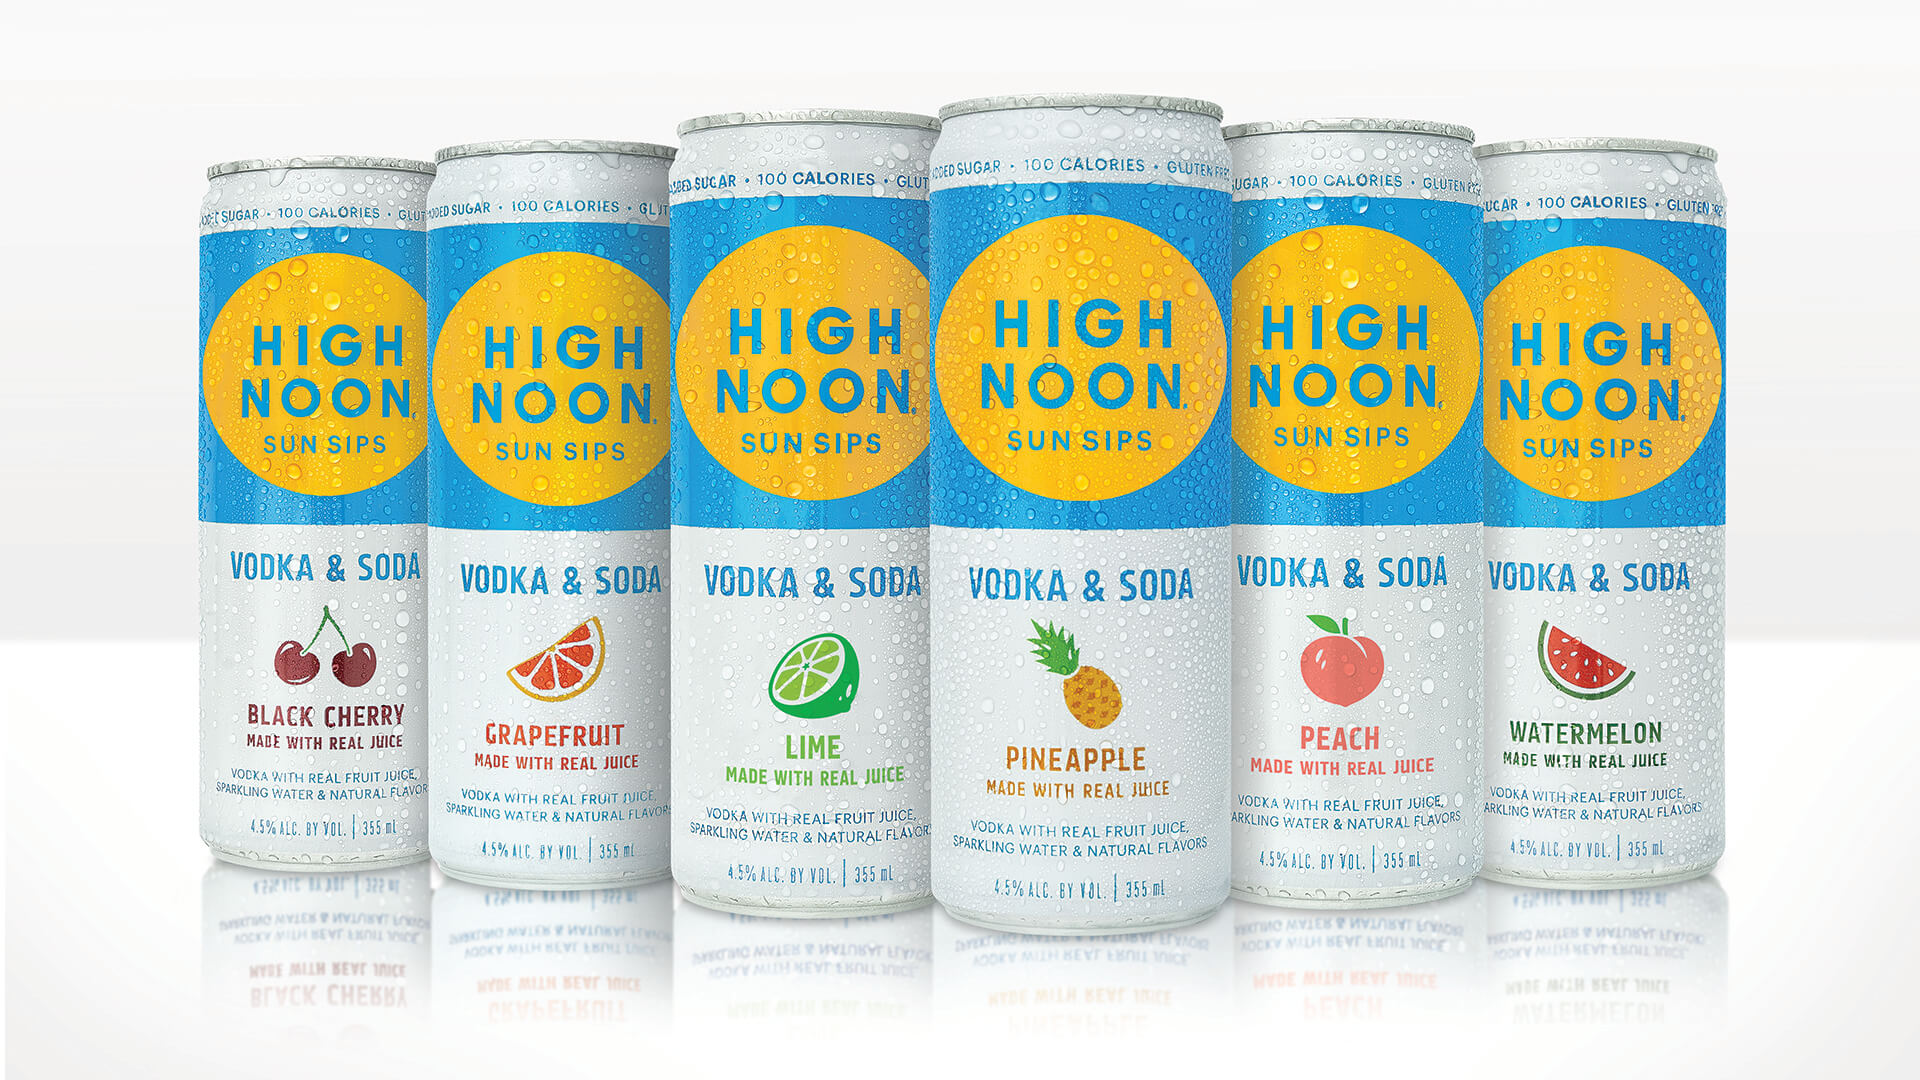 Lineup of all the High Noon Sun Sips Vodka & Soda flavors